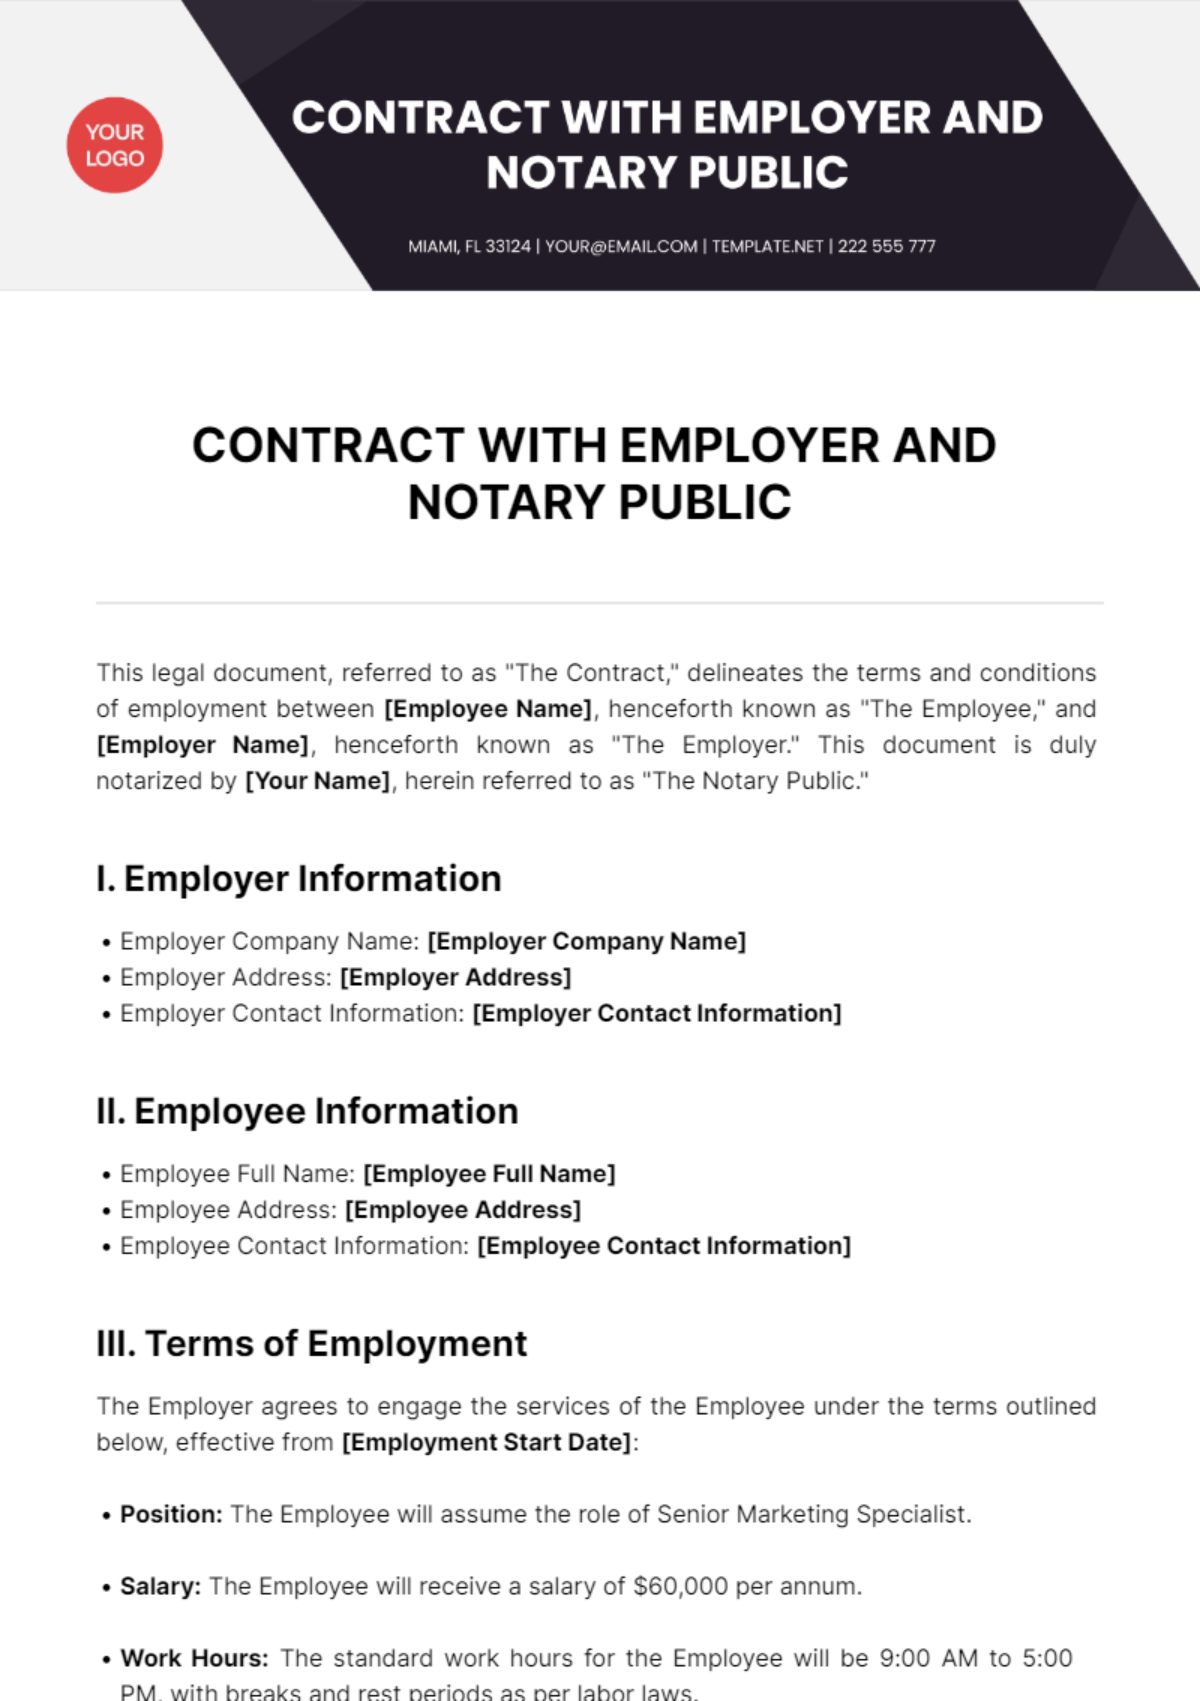 Contract With Employer and Notary Public Template